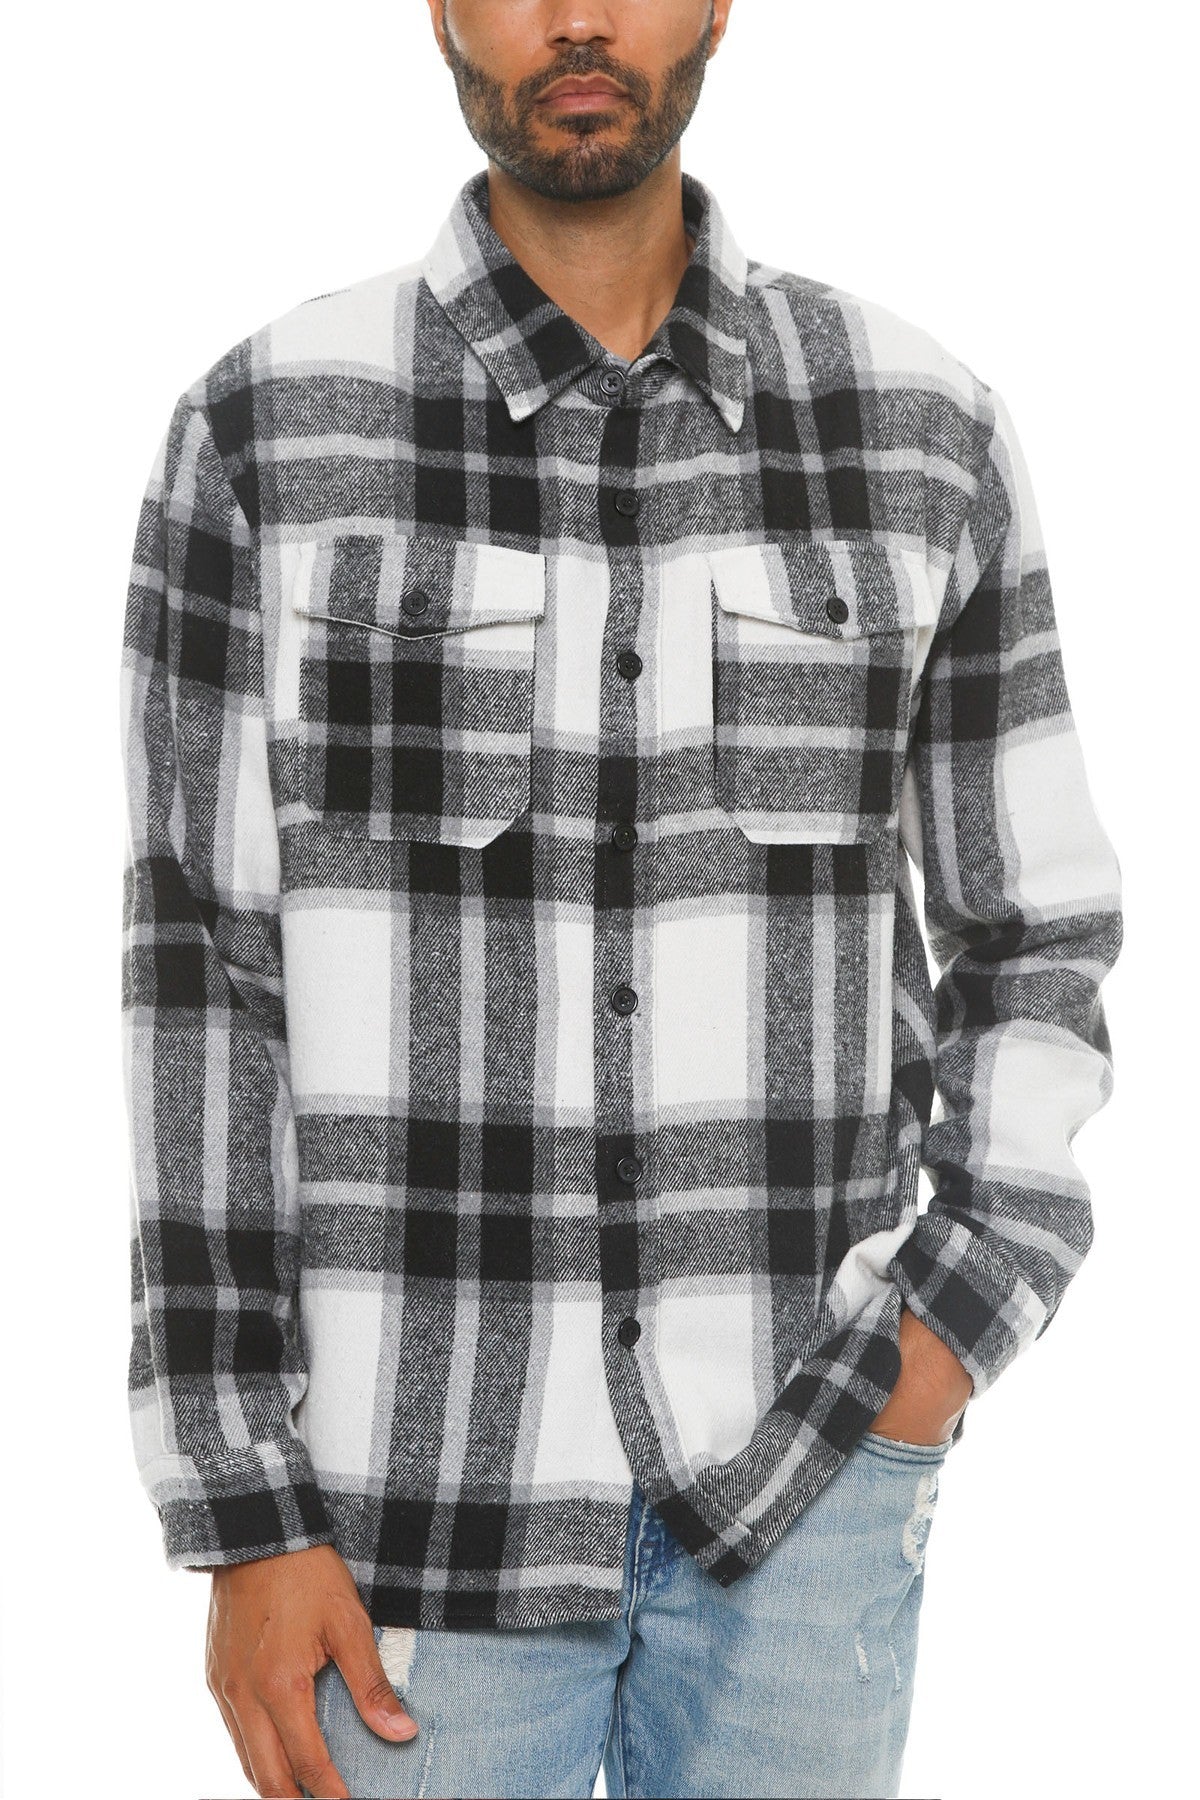 White/Black Men's Checkered Soft Flannel Shacket - 8 colors - men's button-up shirt at TFC&H Co.